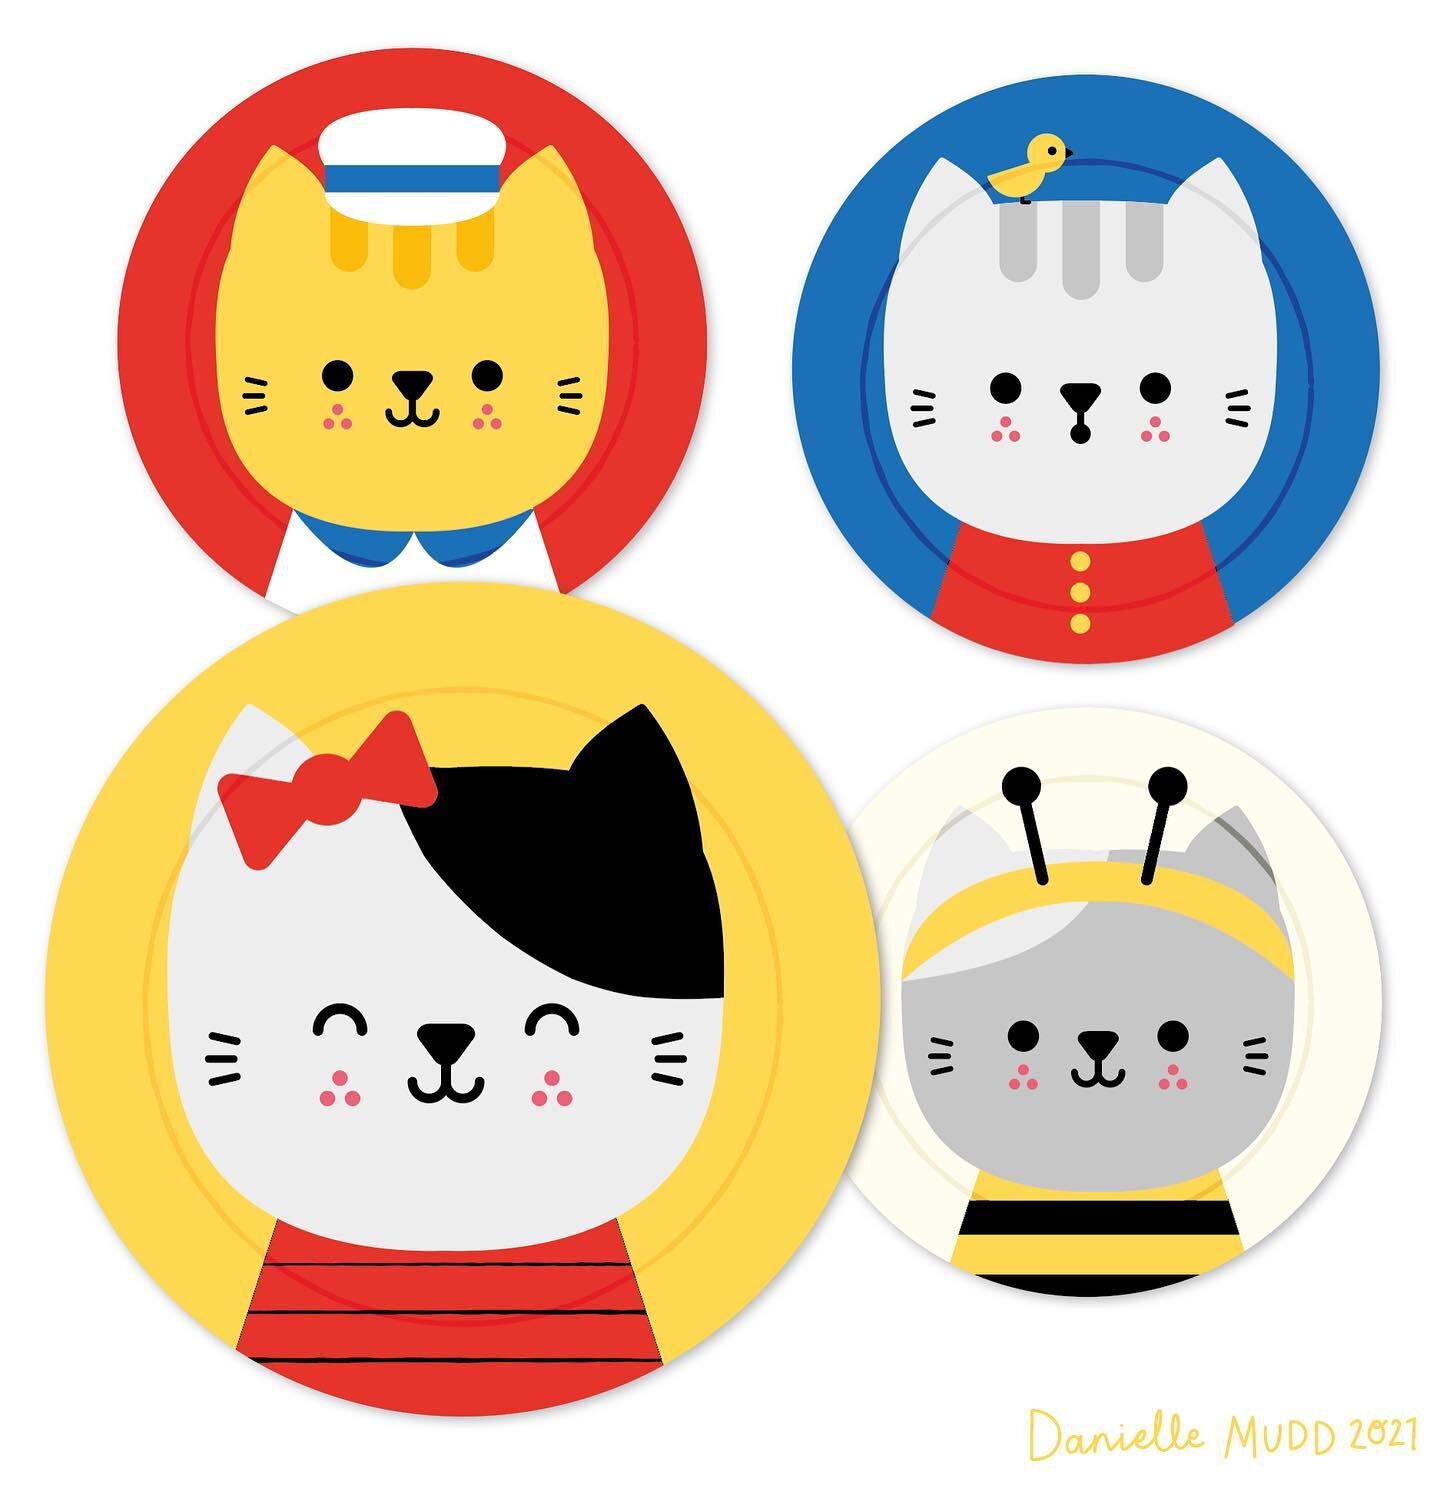 Here&rsquo;s a sneak peek of my assignment for @makeartthatsells #matstoypitch with @lillarogers and @rileywilkinson. A set of cute little cat plates which are part of &lsquo;Kitty Creperie&rsquo; a crepe cafe complete with fabric crepes and toppings